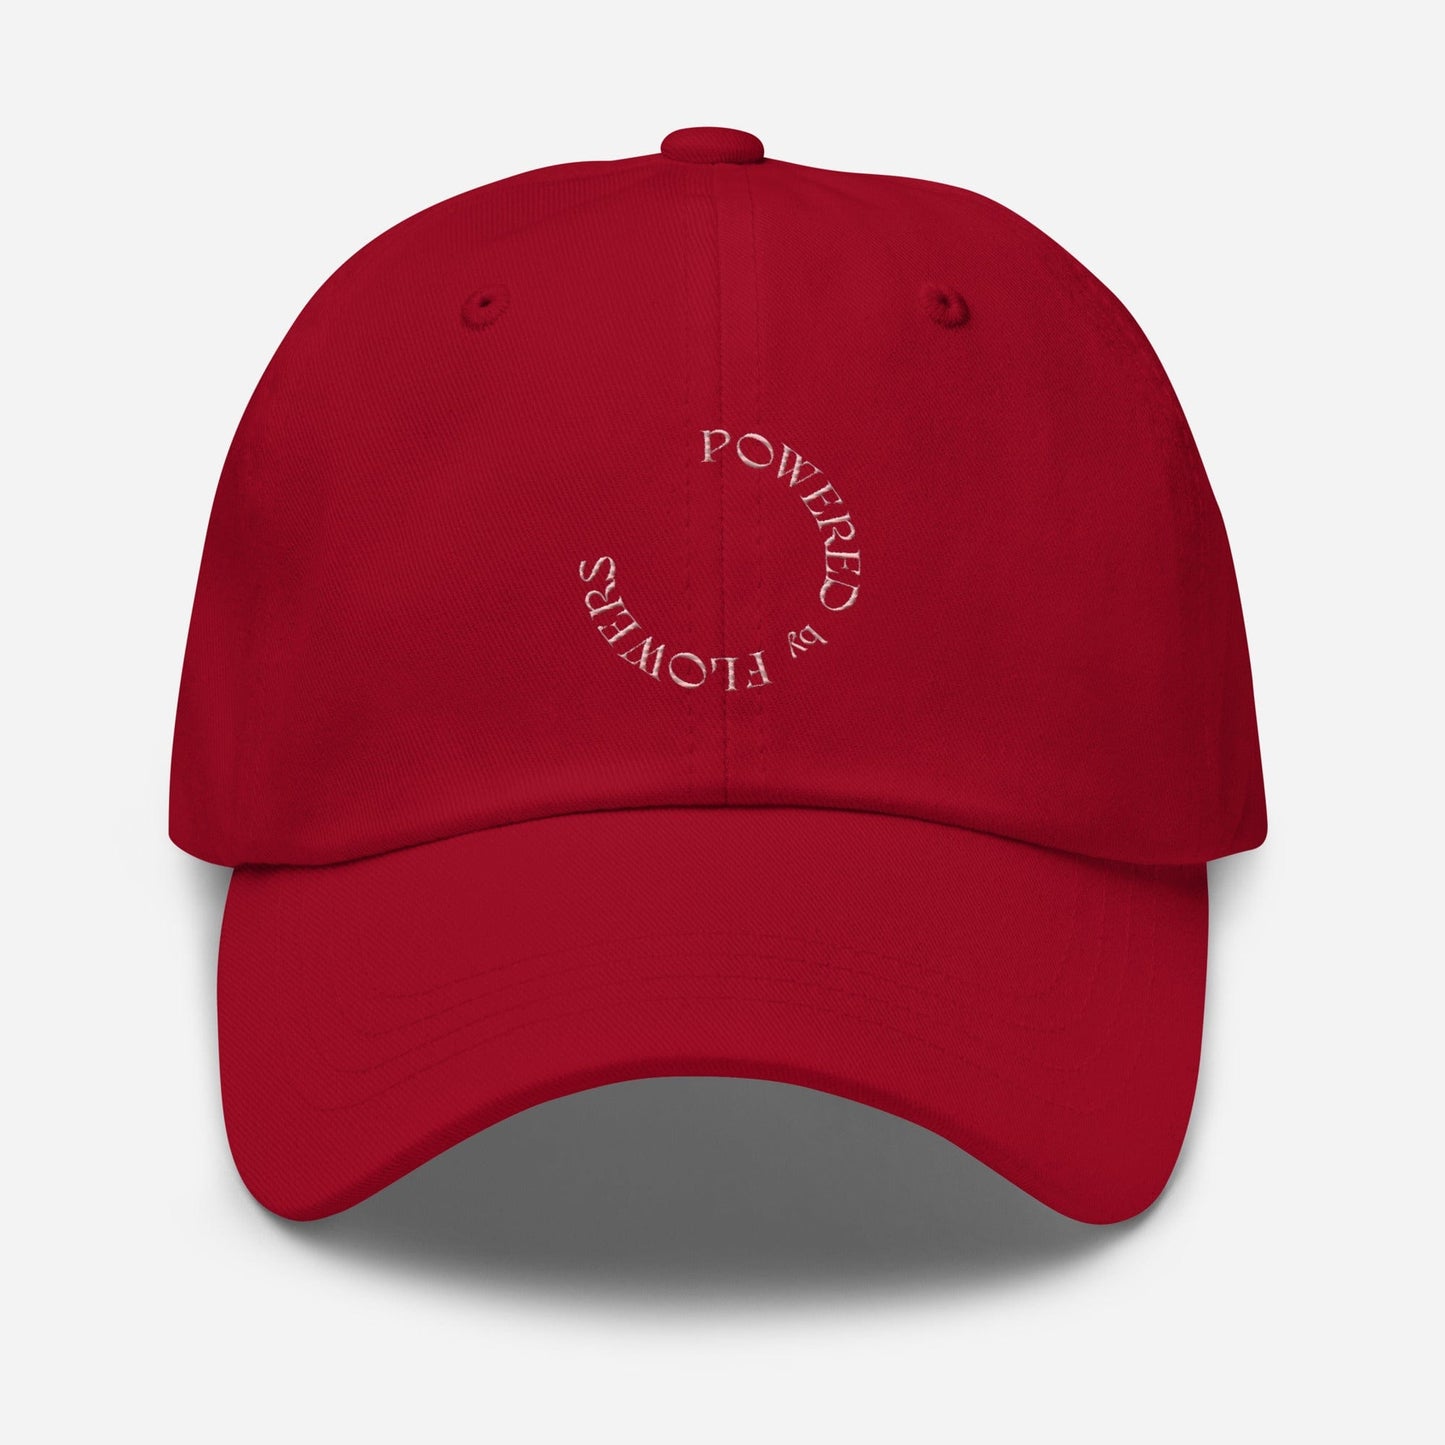 Powered by Flowers Hat - Pink Lettering